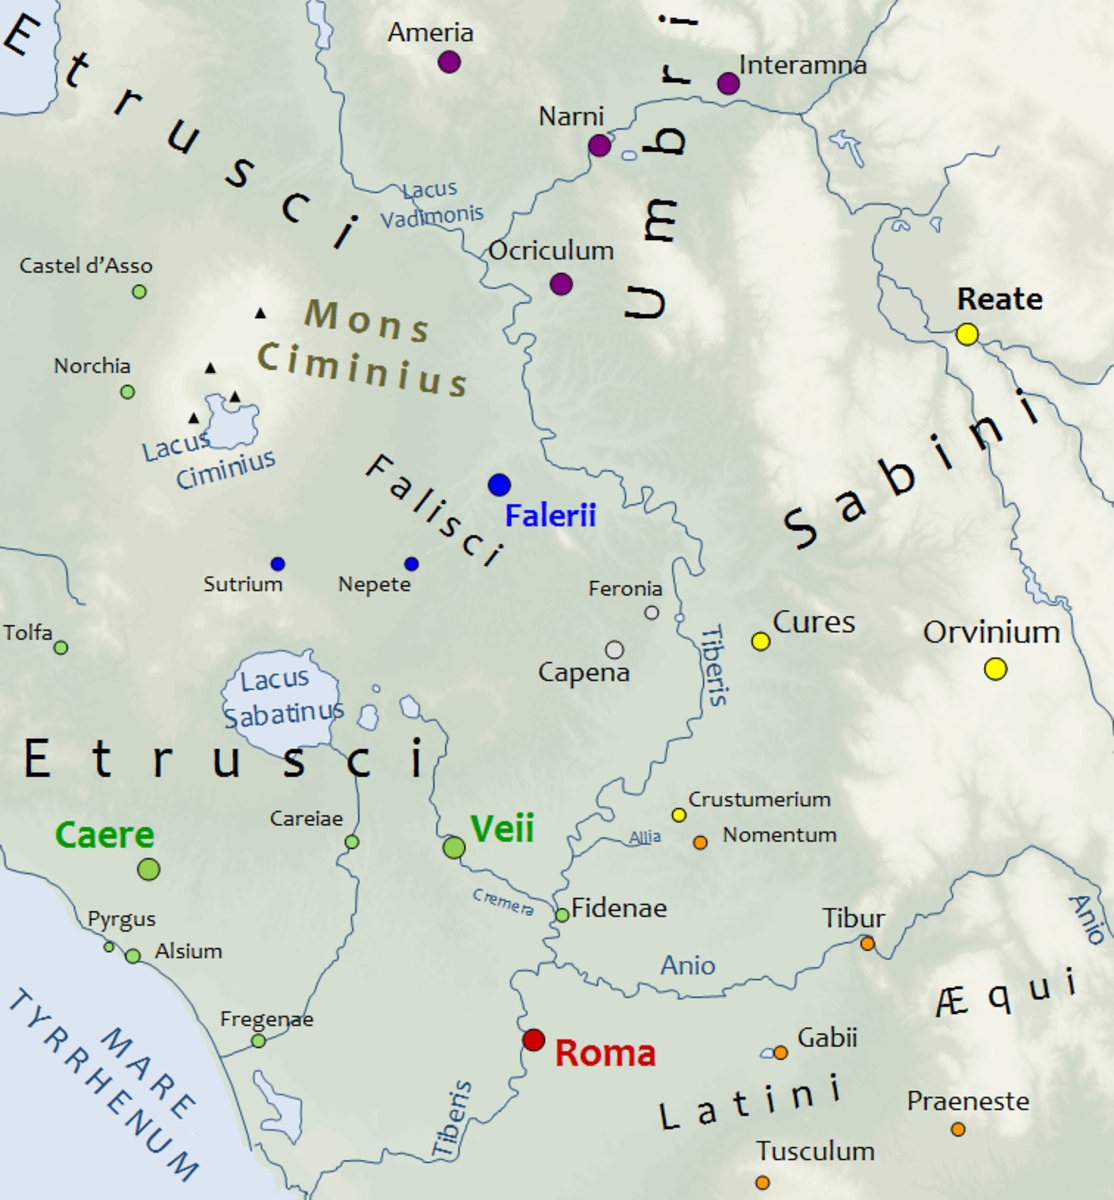 Map of central Italy around 450 BC. Rome (Roma) was surrounded by the Etruscans and Sabines to the north and the Latins to the south.